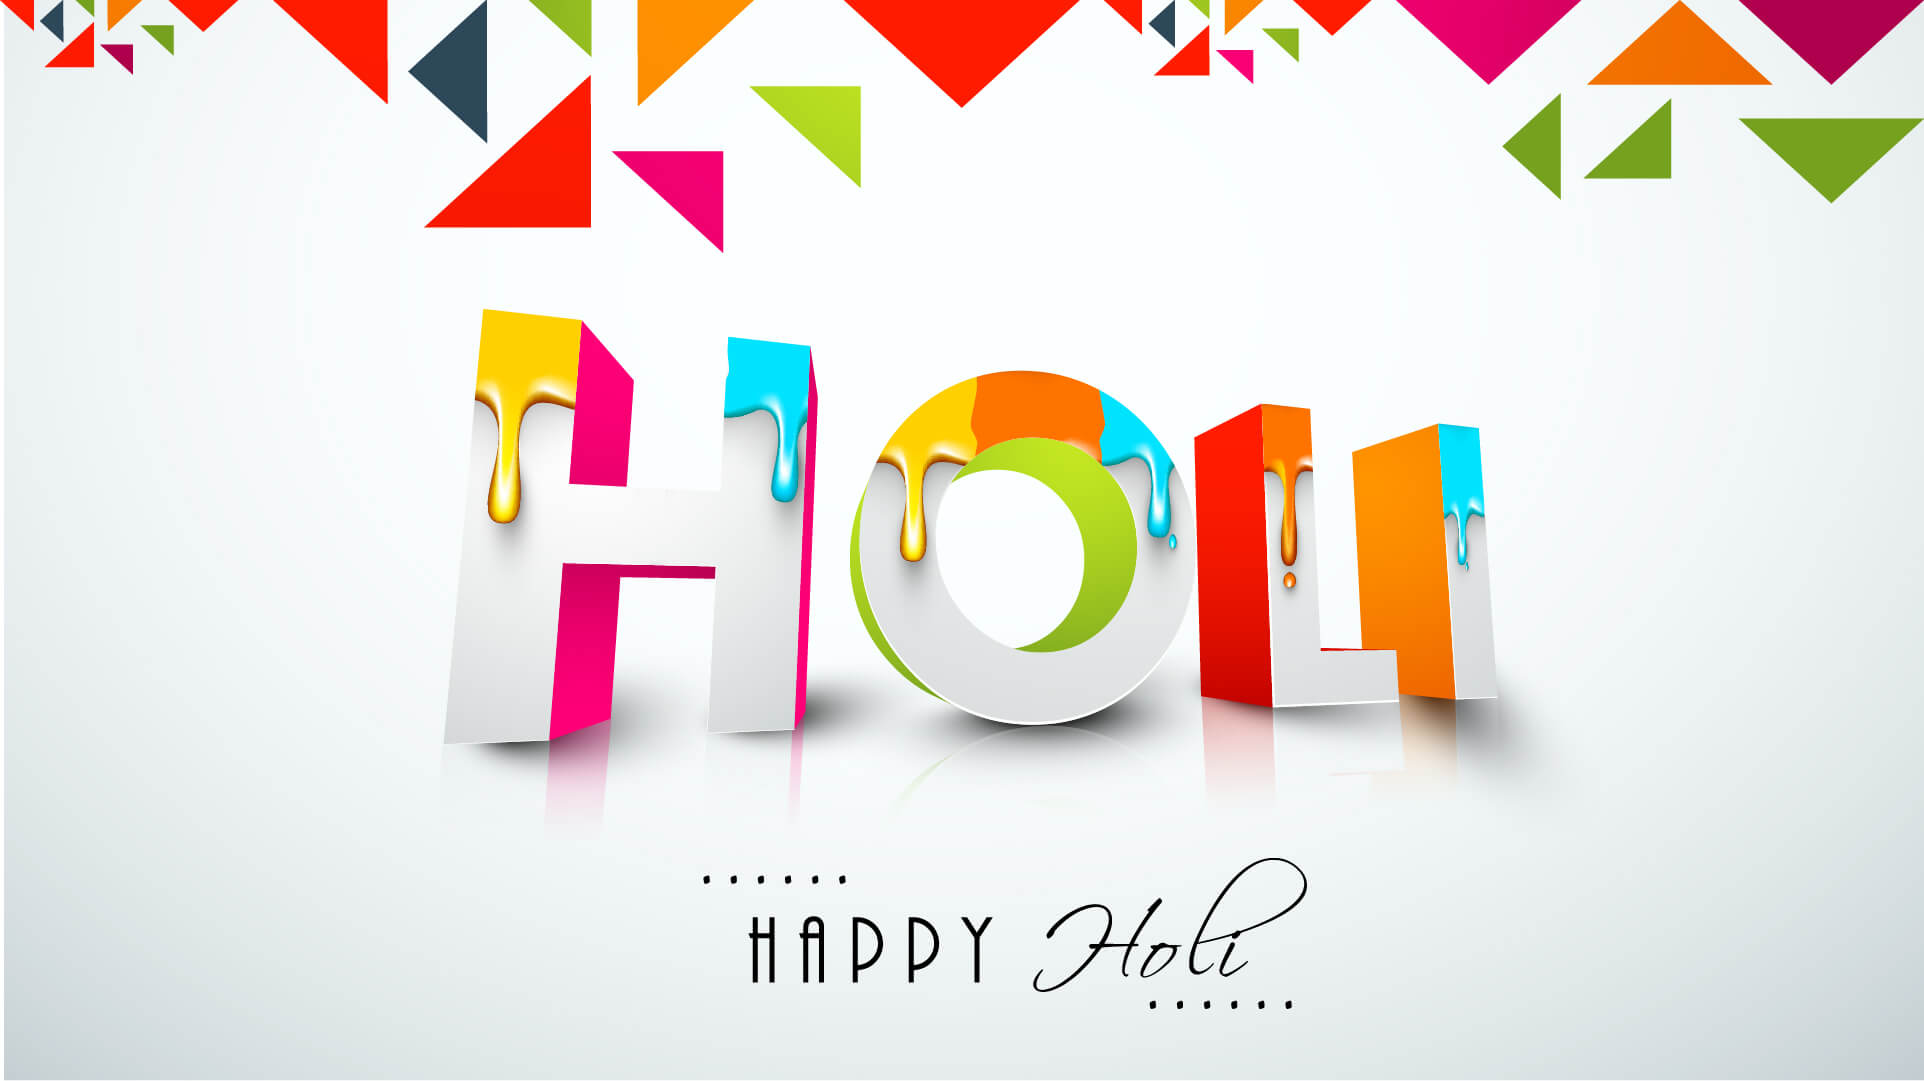 Download Happy Holi Wallpapers and Holi Greetings | CGfrog | Page 3 of 3